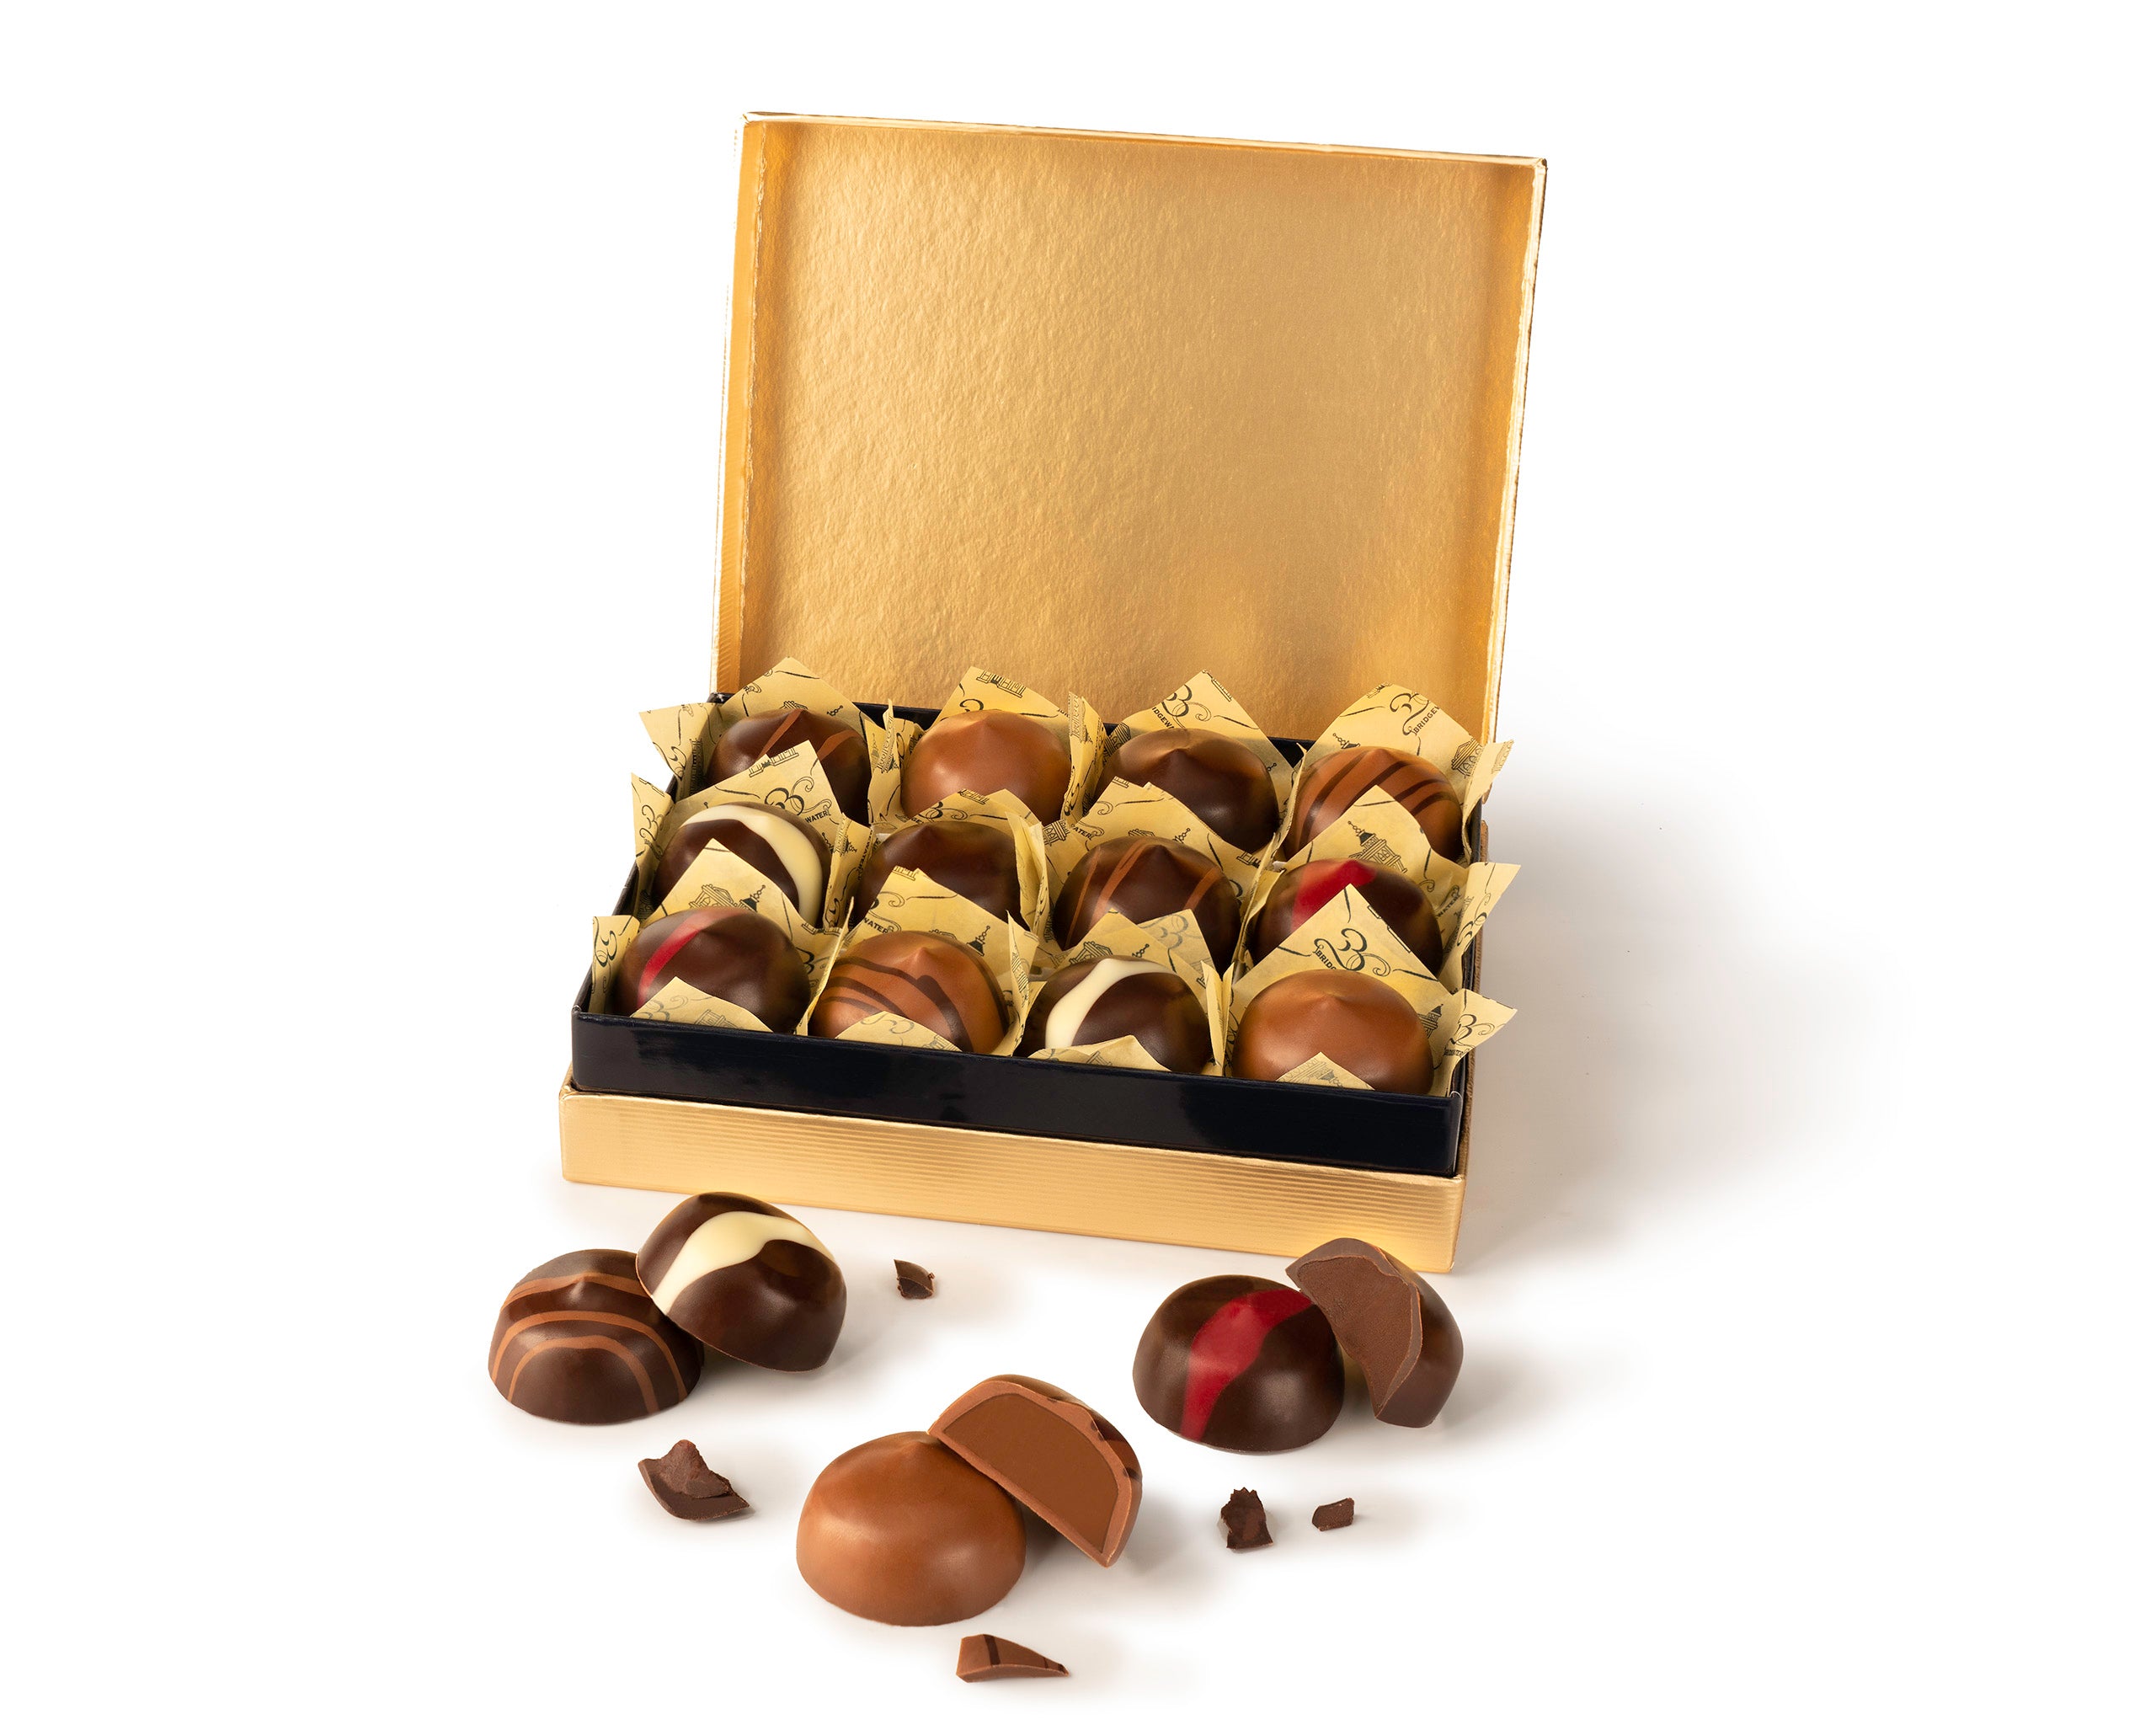 24 Piece Chocolate Assortment Box - Bonbons, Caramels, and Toffee – LUX  Artisan Chocolates